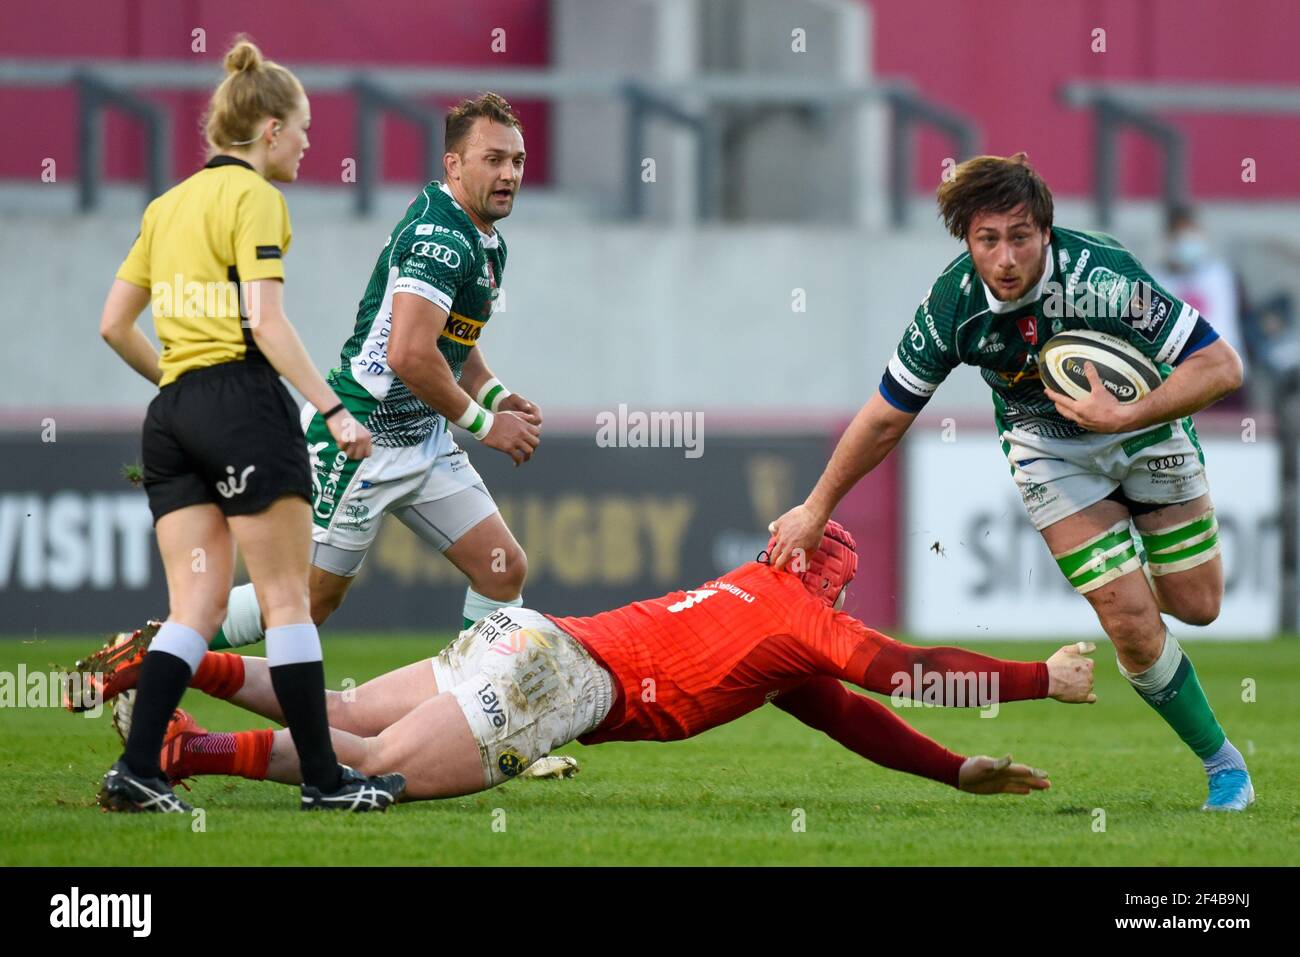 Limerick, Ireland. 19th Mar, 2021. Giovanni Pettinelli of Benetton tackled  by Chris Cloete of Munster during the Guinness PRO14 Round 16 match between  Munster Rugby and Benetton Rugby at Thomond Park in